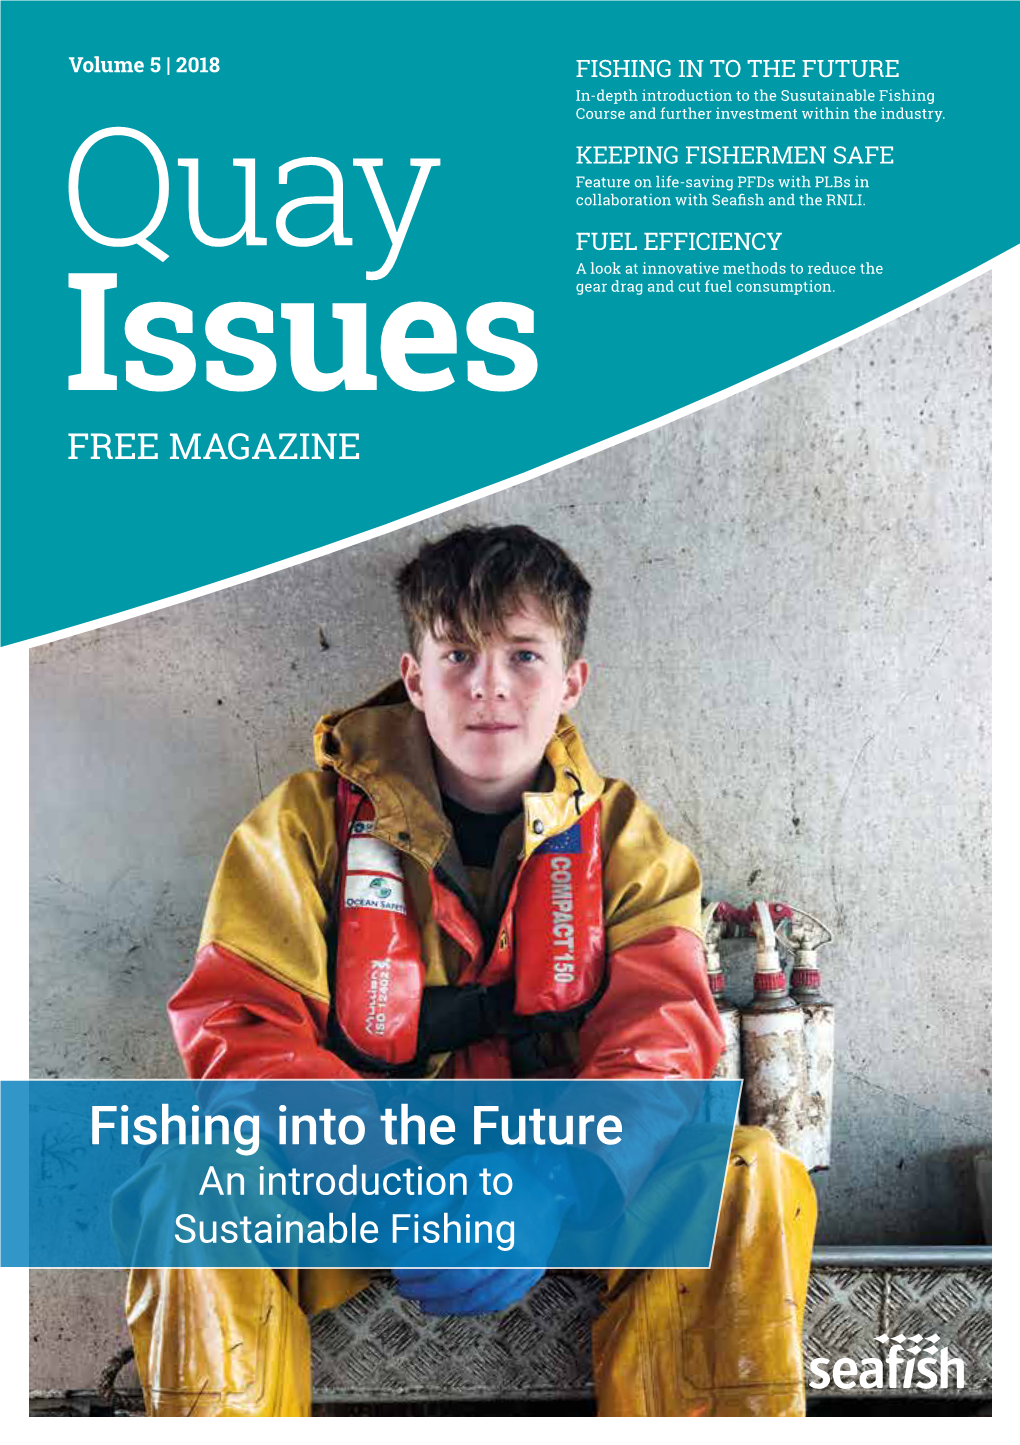 Fishing Into the Future an Introduction to Sustainable Fishing November 2018